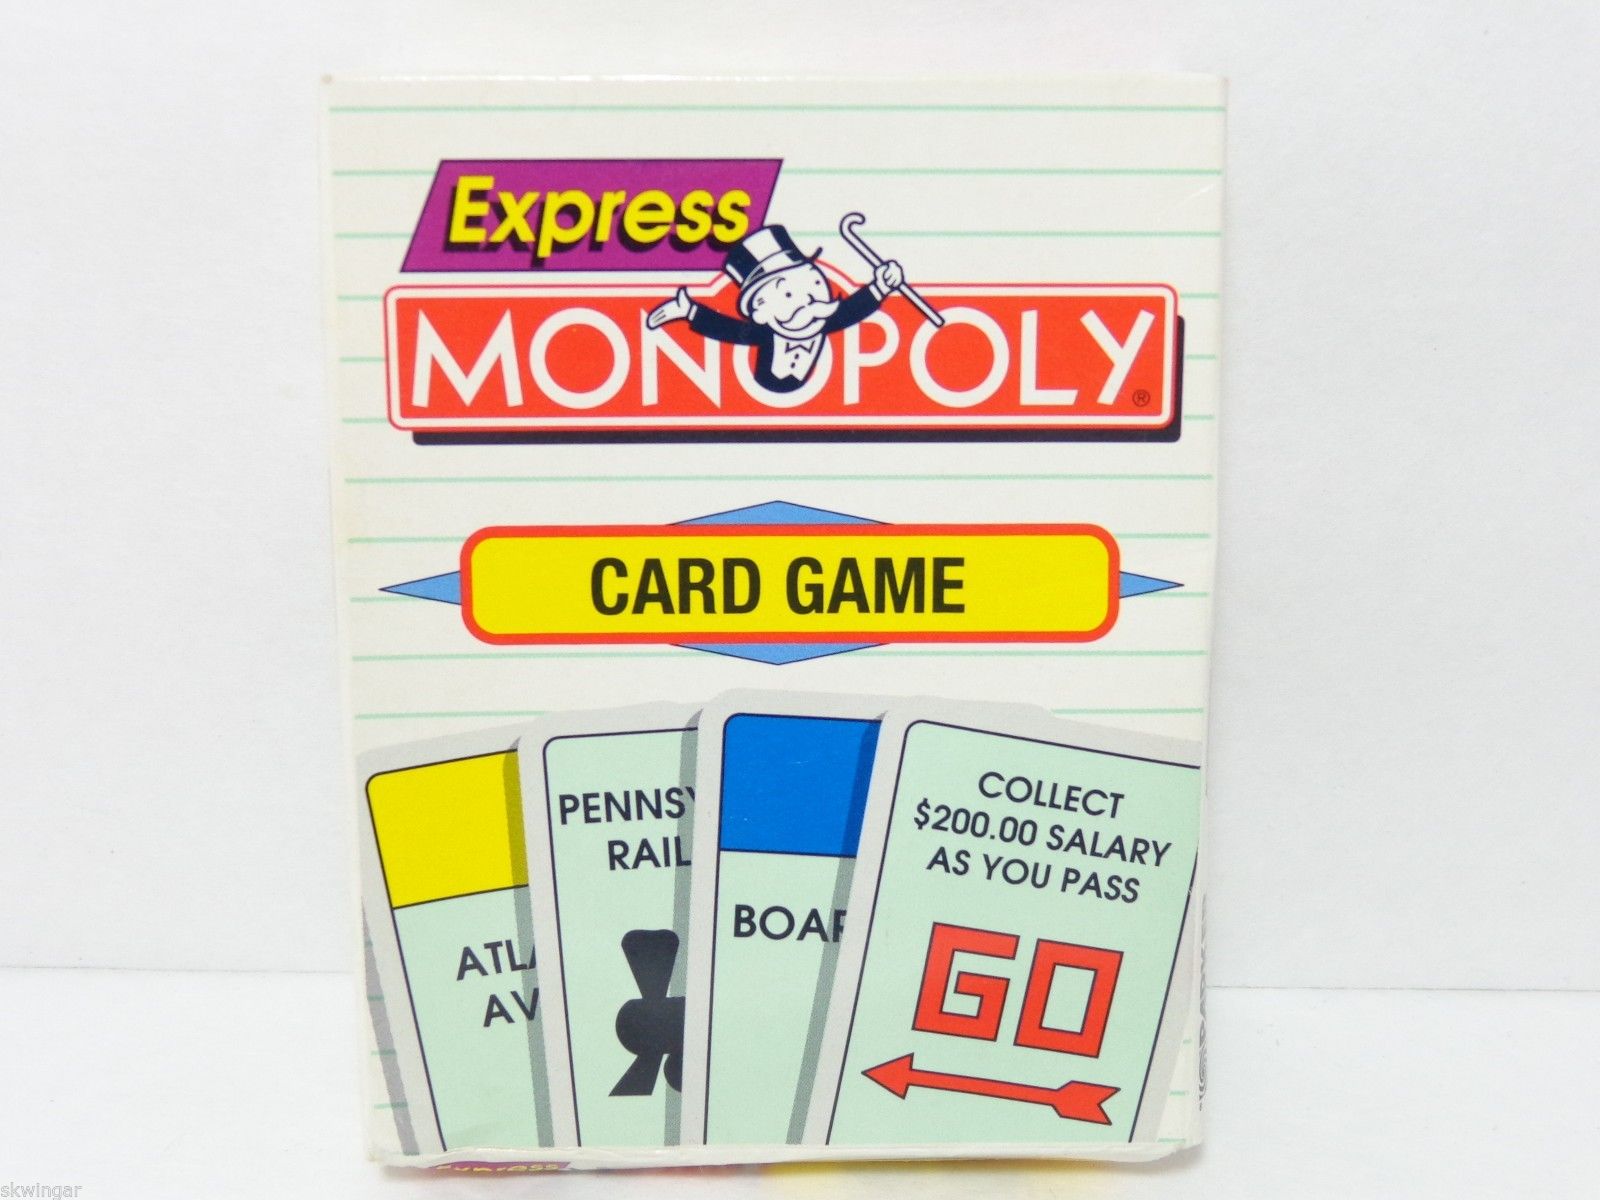 Monopoly card game